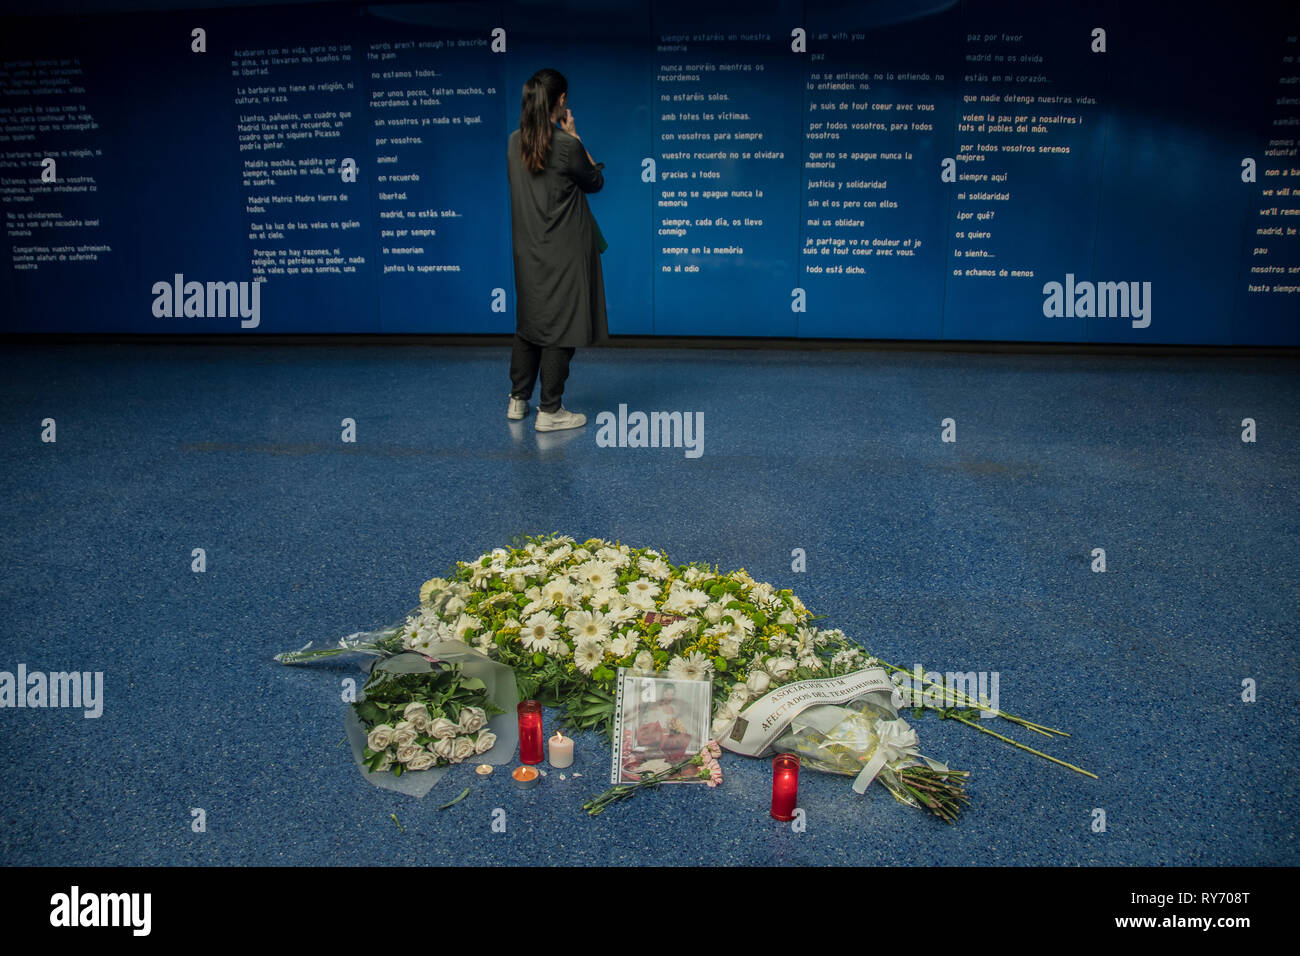 A woman seen at the mausoleum reading information during a tribute of those affected by the terrorist attack in 2004.  Homage to the victims of 11 terrorism attack 2004 at the atocha train station in Madrid, Spain. Stock Photo